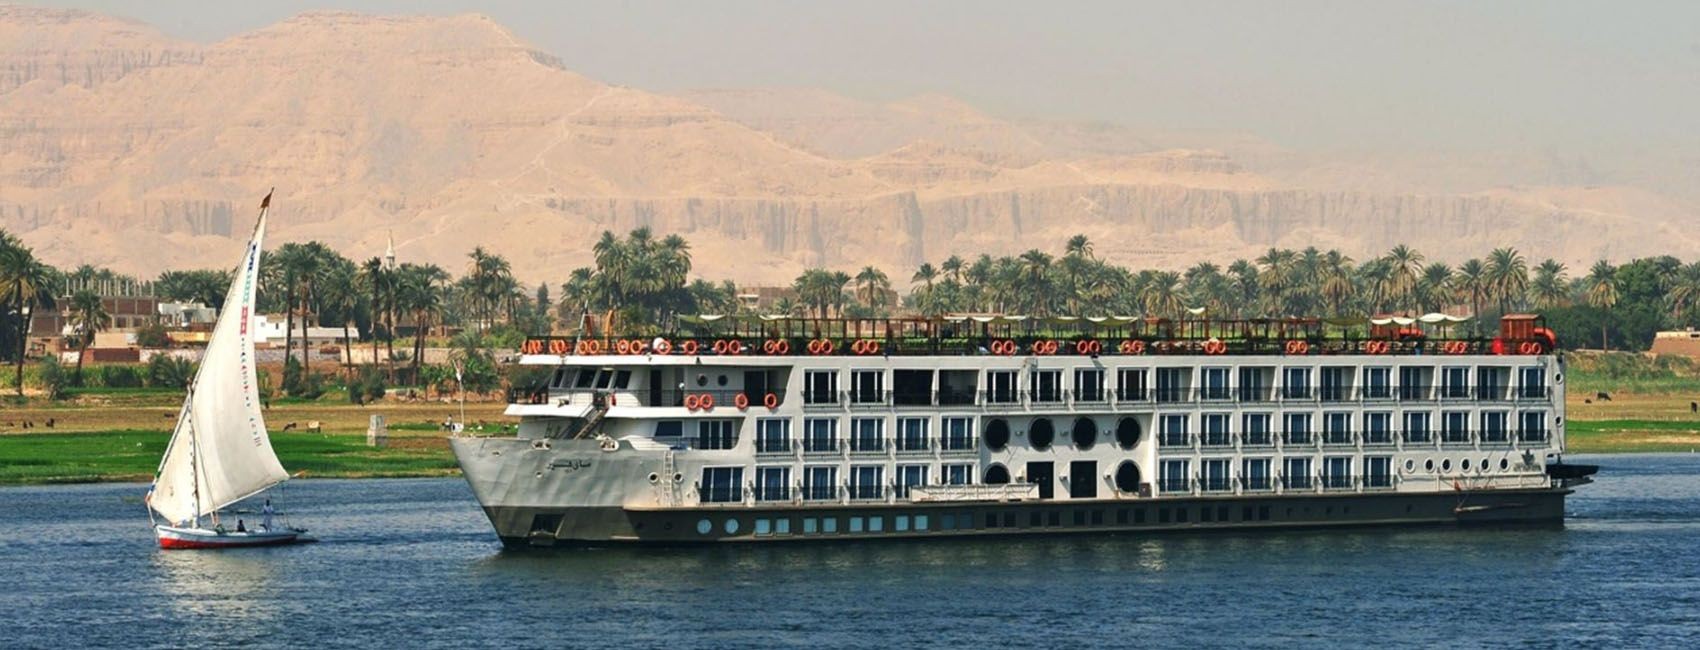 8 days Nile cruise Luxury package from Egypt Us